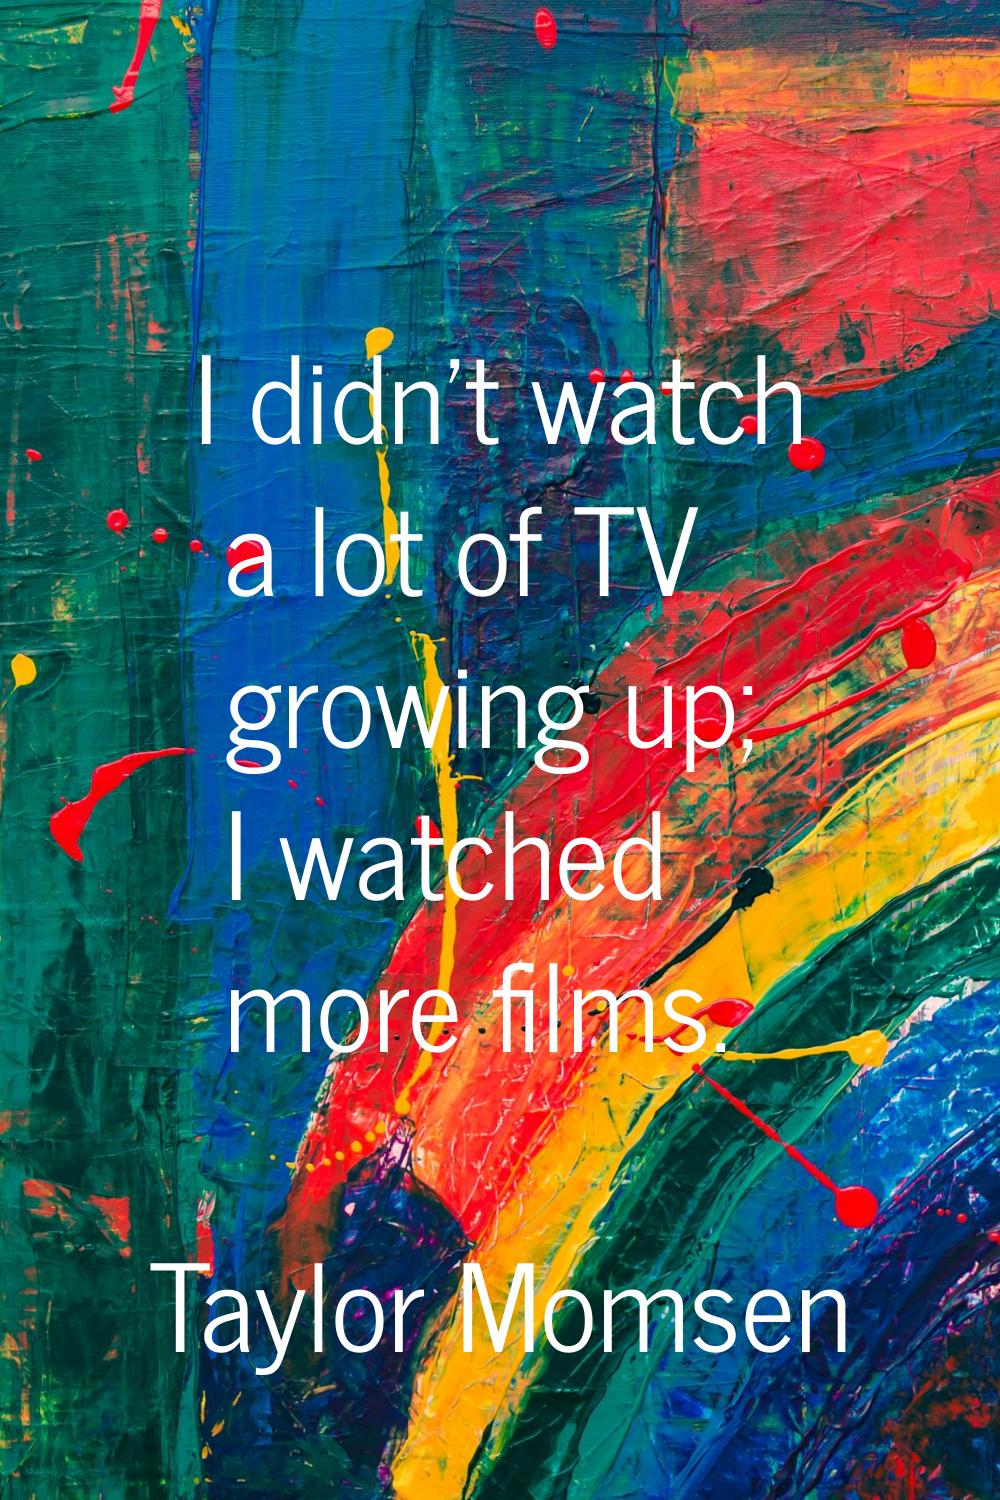 I didn't watch a lot of TV growing up; I watched more films.